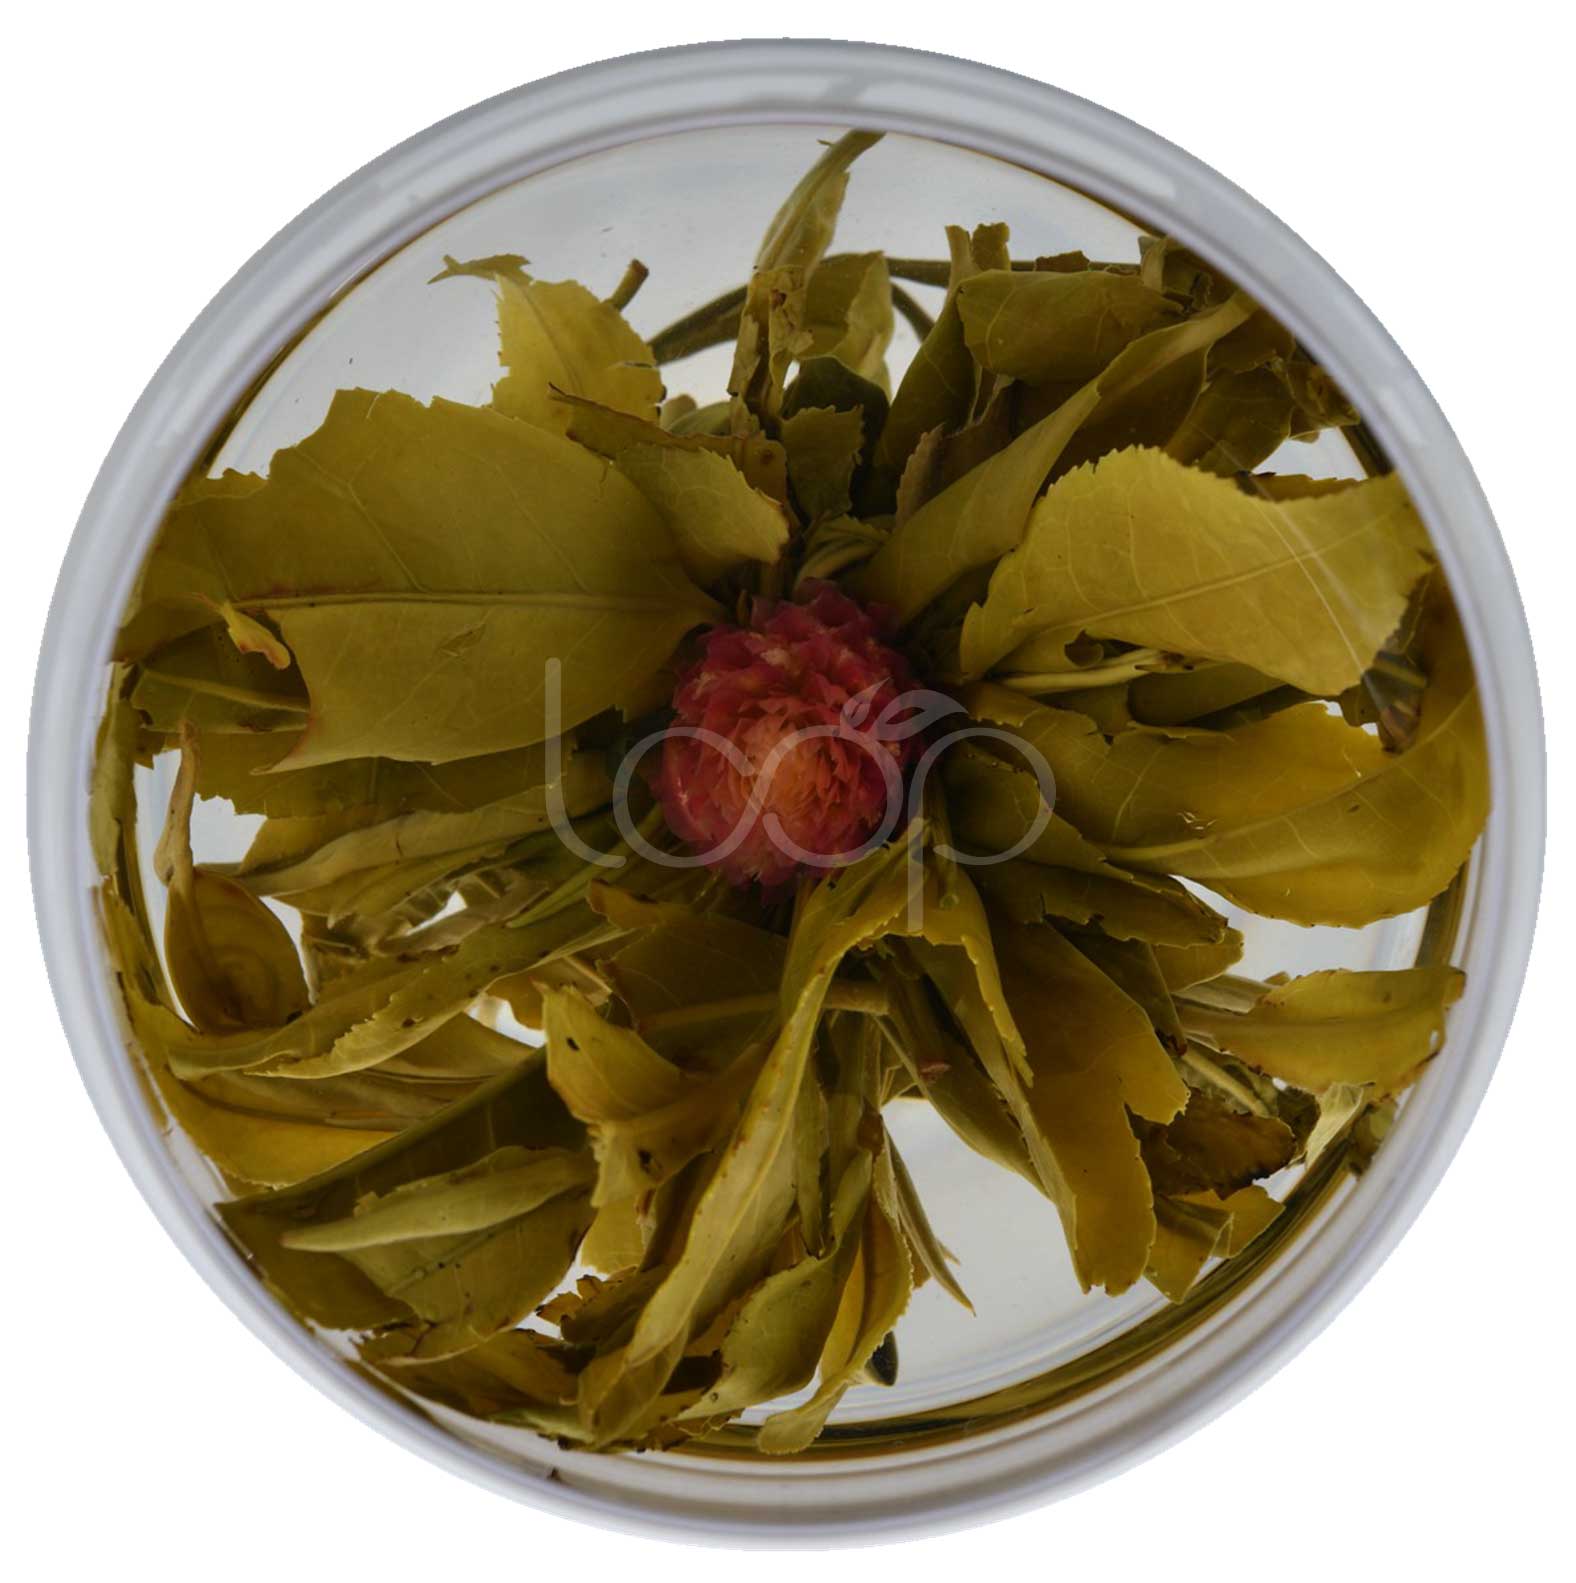 High Quality Sipology Blooming Tea - Blooming Tea One Red On The Top – Goodtea